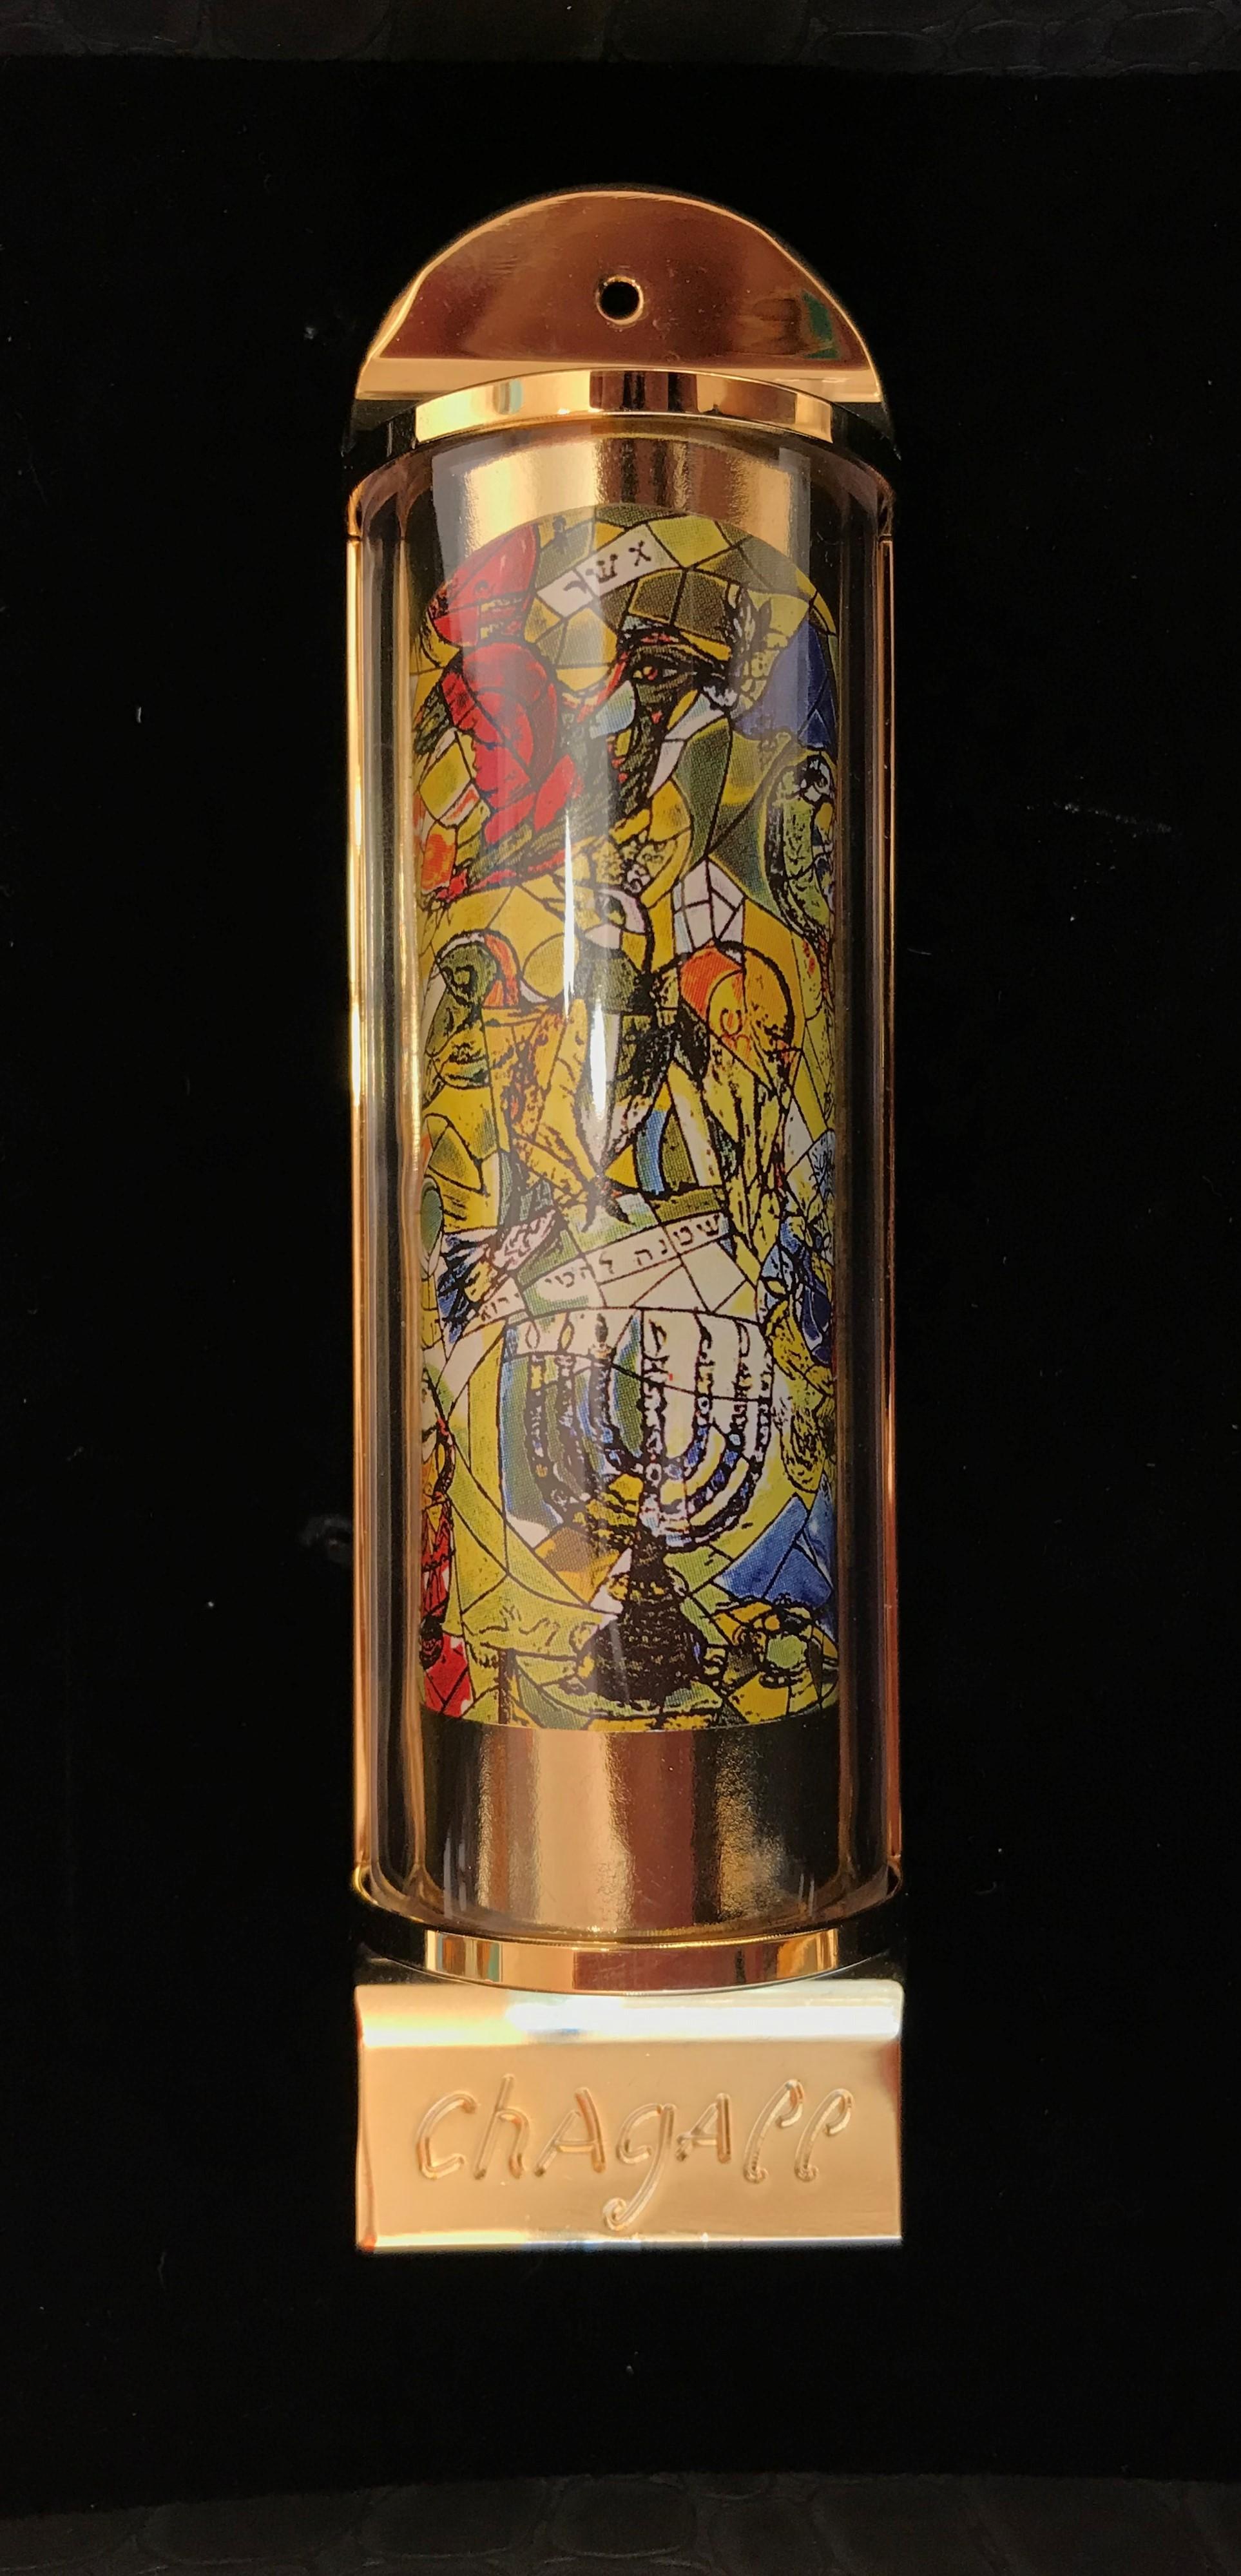 The Chagall Mezuzah - "Asher" tribe - Art by (after) Marc Chagall